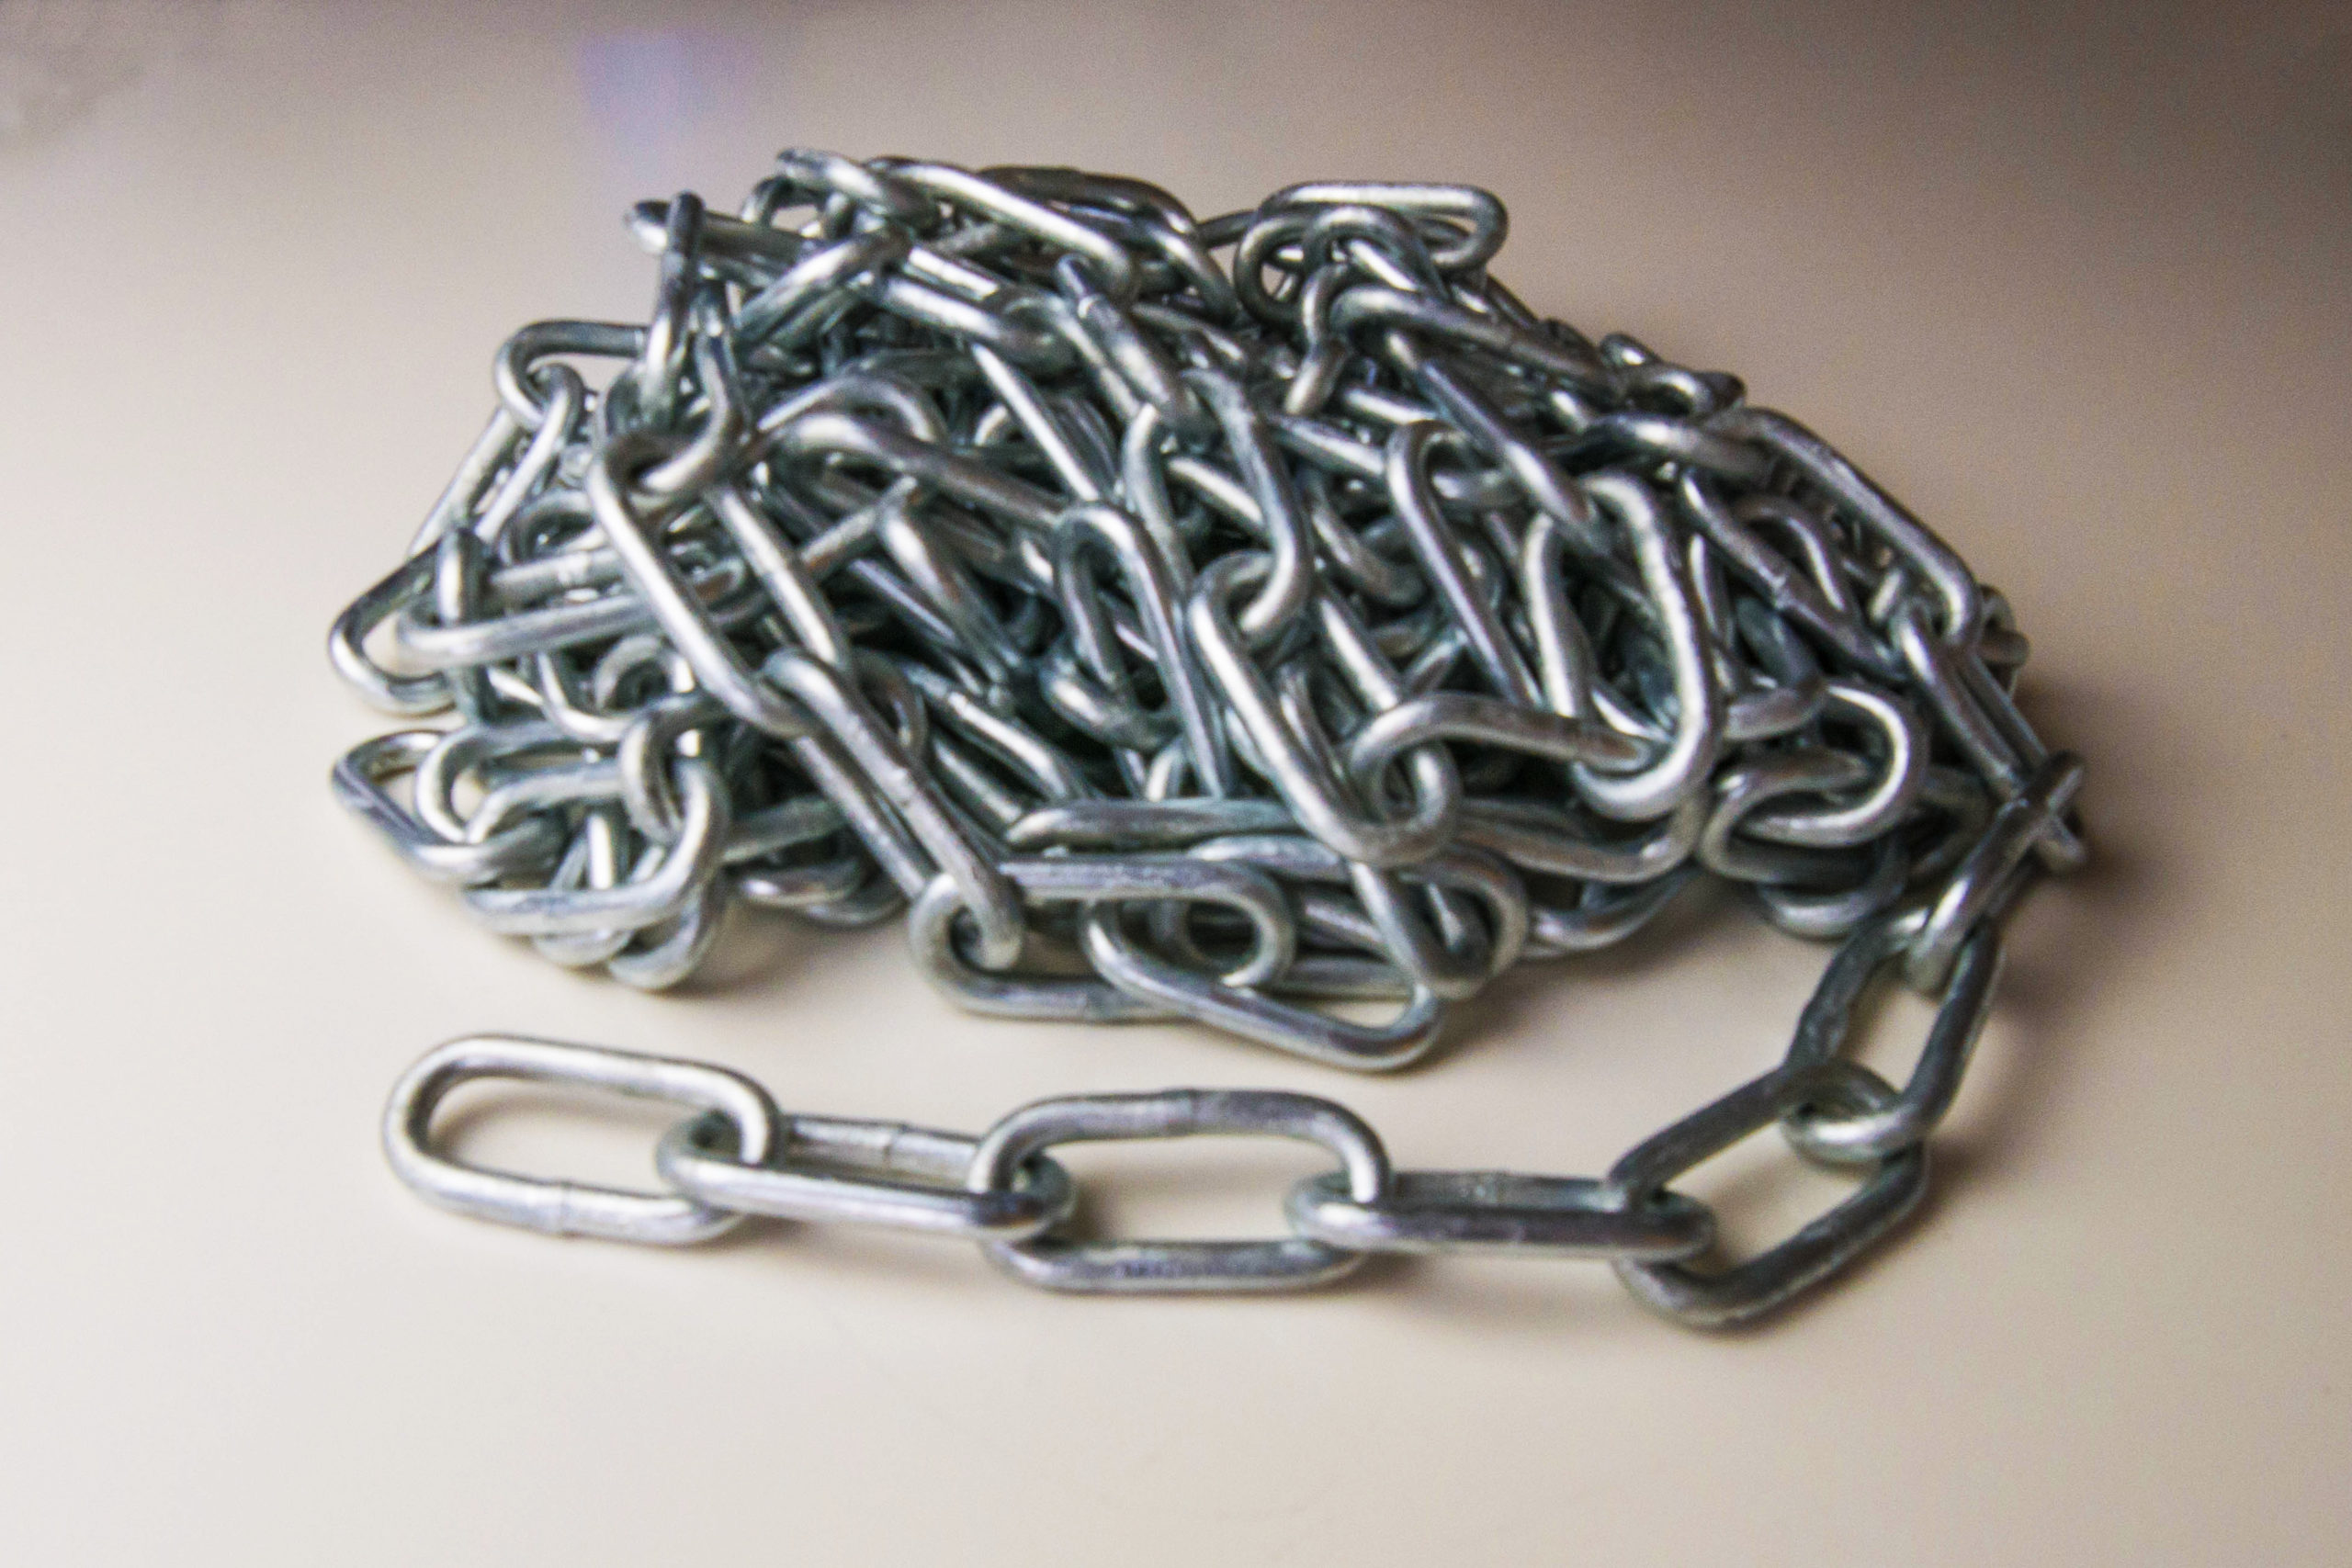 40298_Anchor_chain_stainless_steel_long_link-edited2